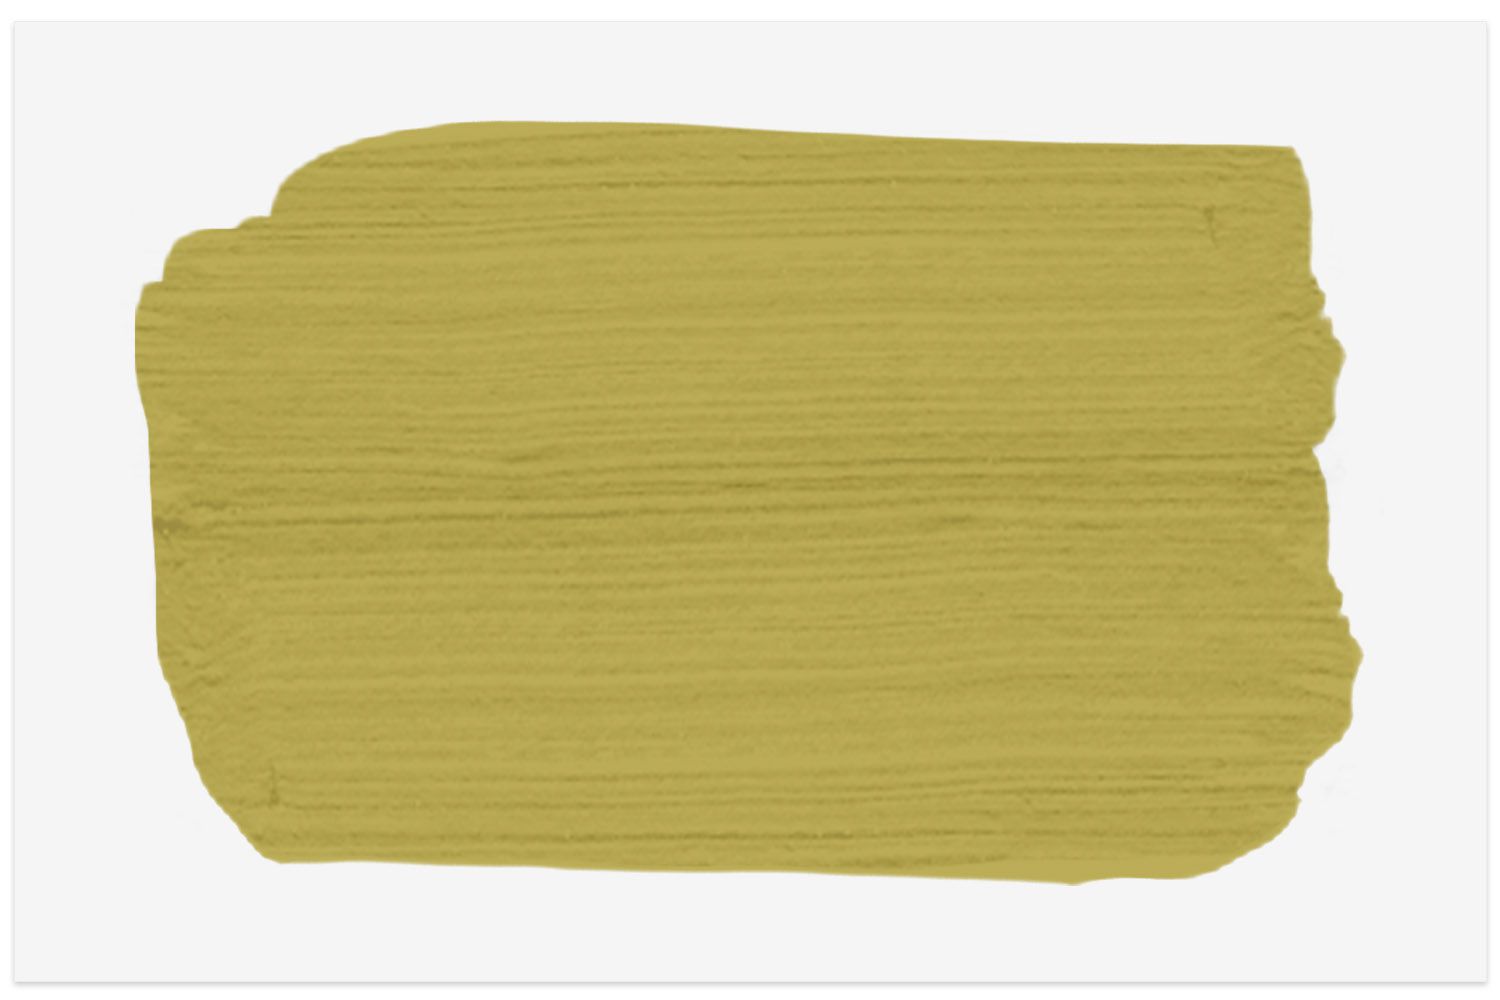 Antiquity paint swatch from Sherwin-Williams